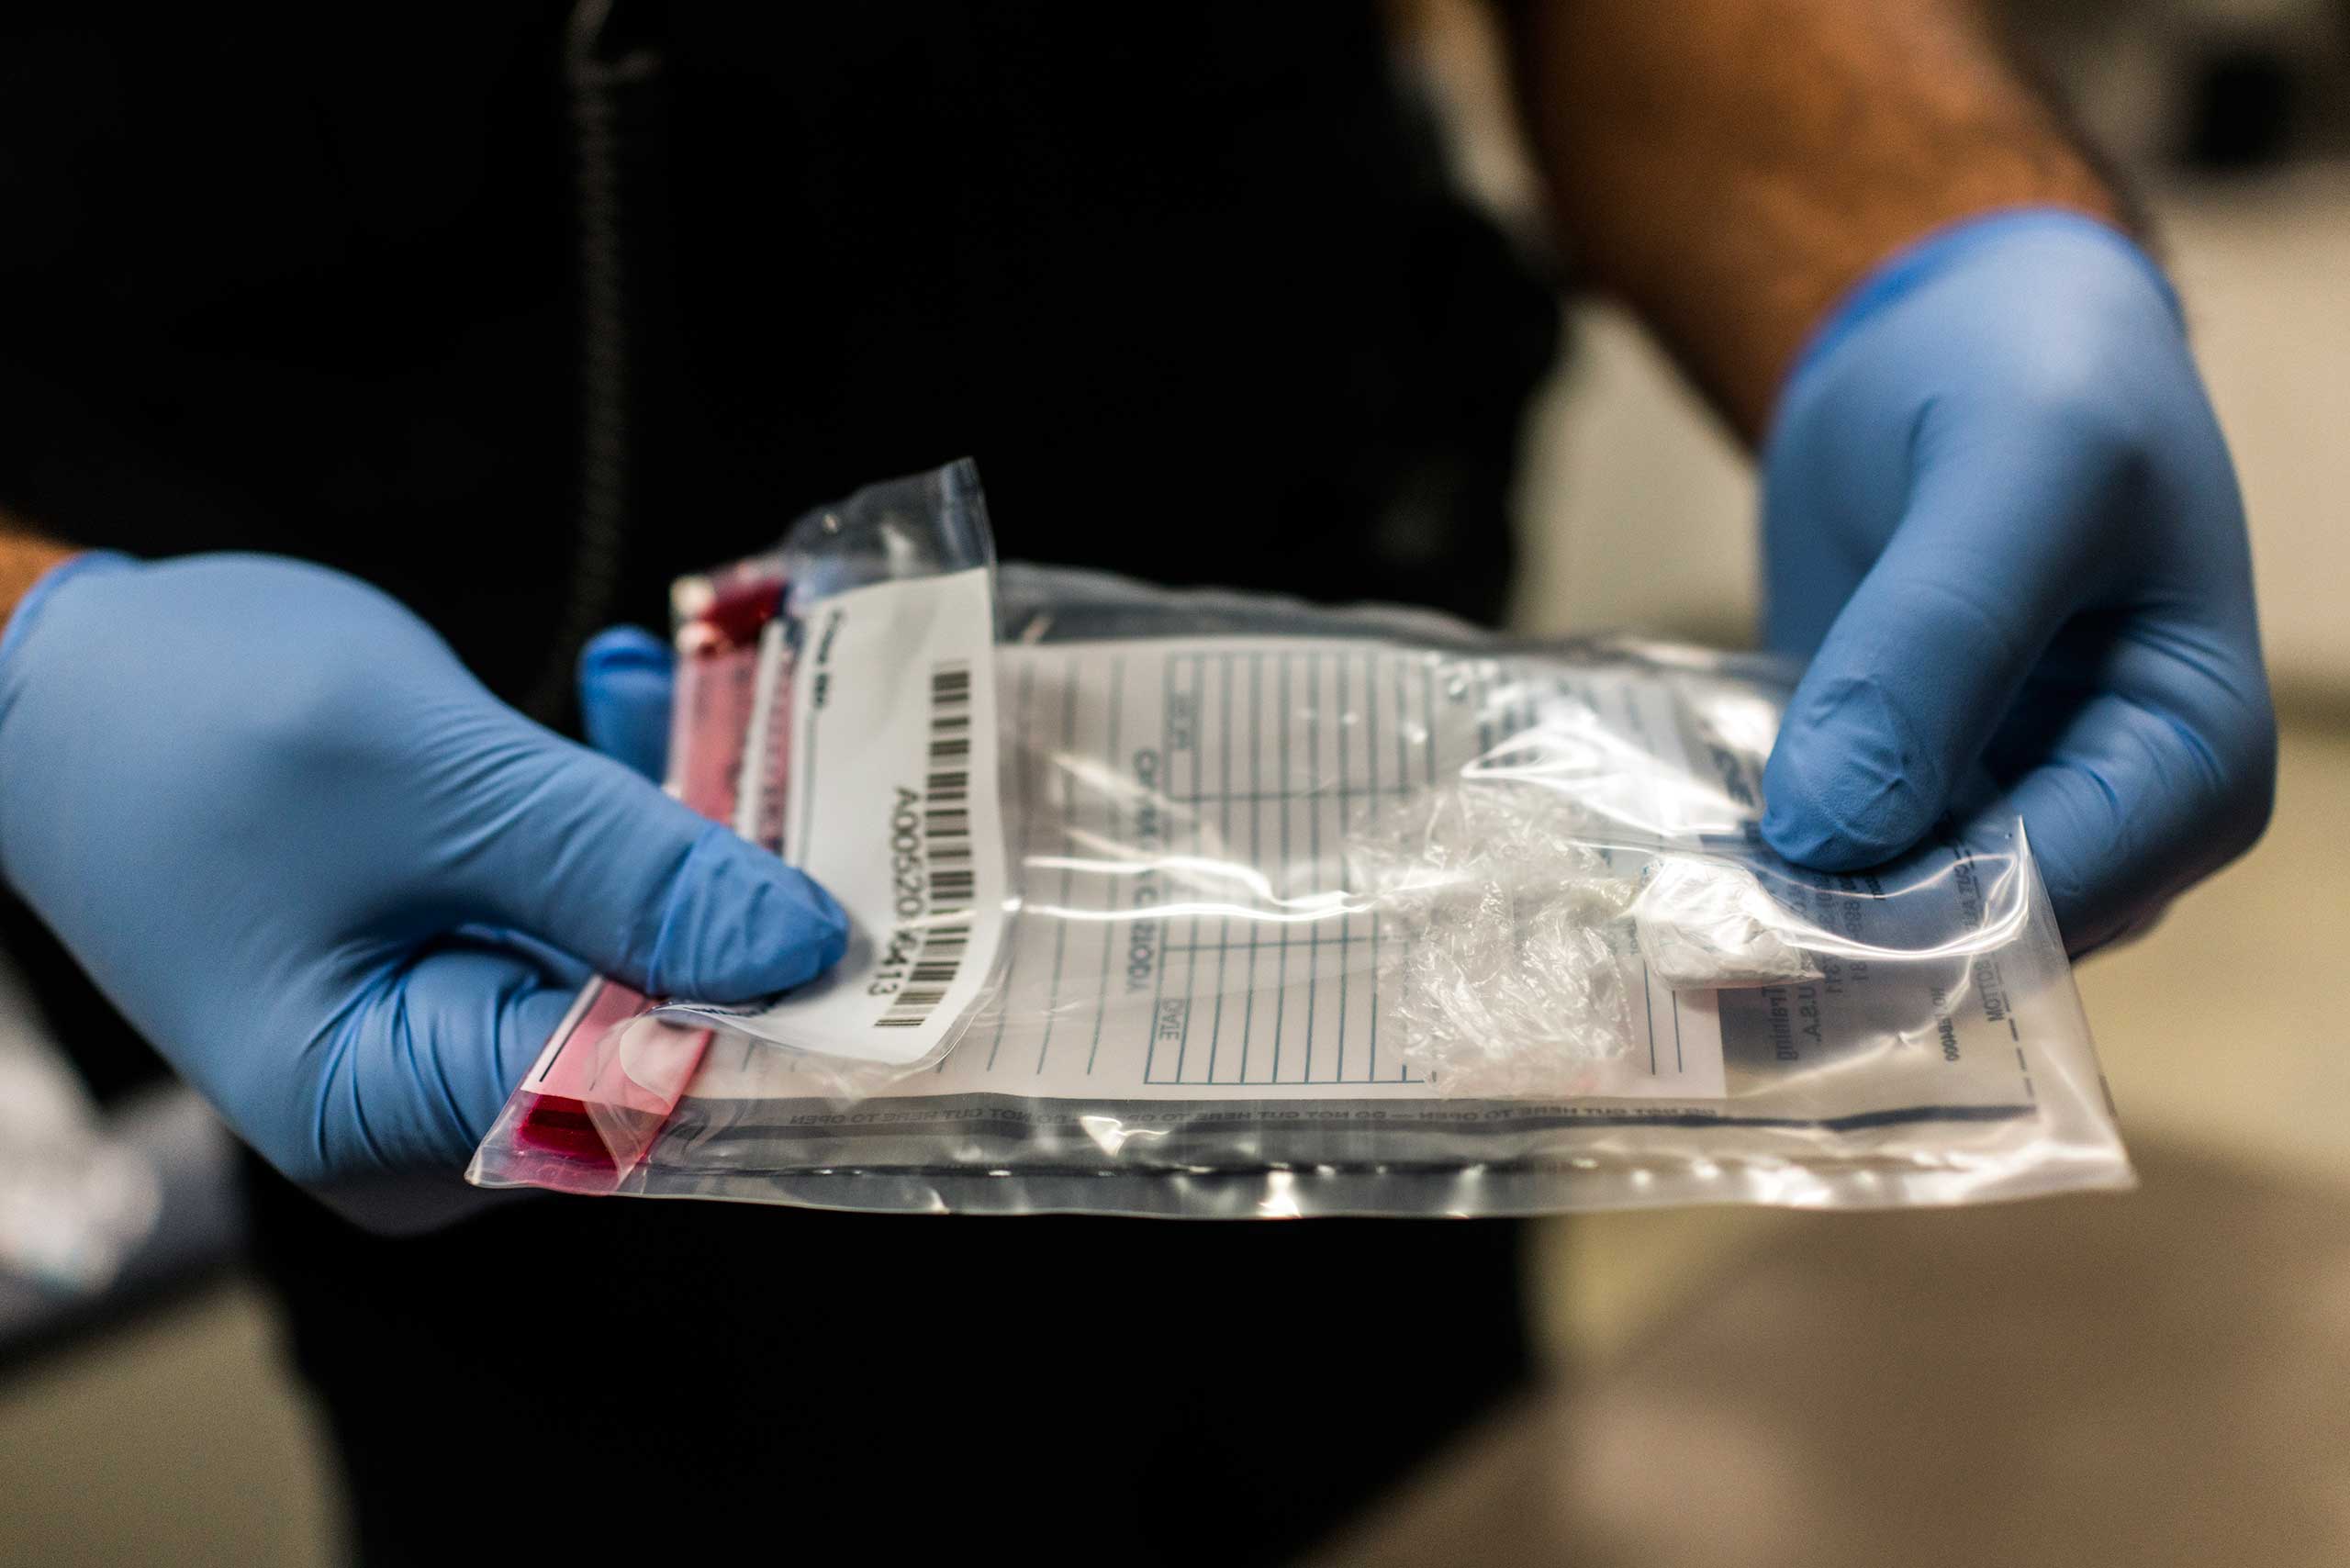 An East Liverpool police officer shows an evidence bag filled with heroin on Oct. 7, 2016.  We can't even touch these things anymore,  he said.  These drugs are cut with so much Fentanyl that one touch, one breathe, would kill most men.